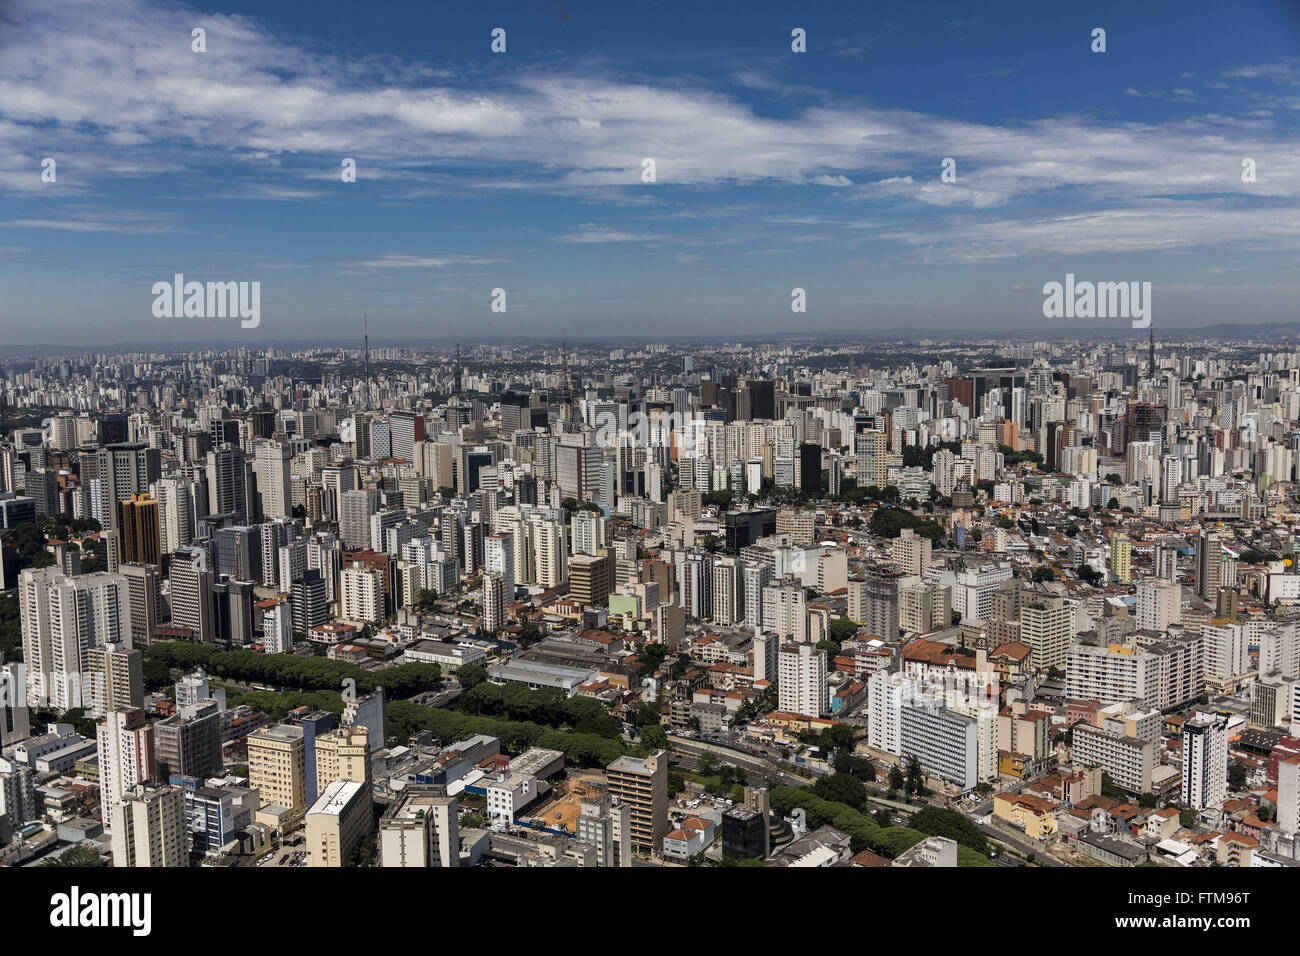 View from Avenida 23 de Maio height of the Bela Vista neighborhood with the region of Paulista Avenue in the background Stock Photo